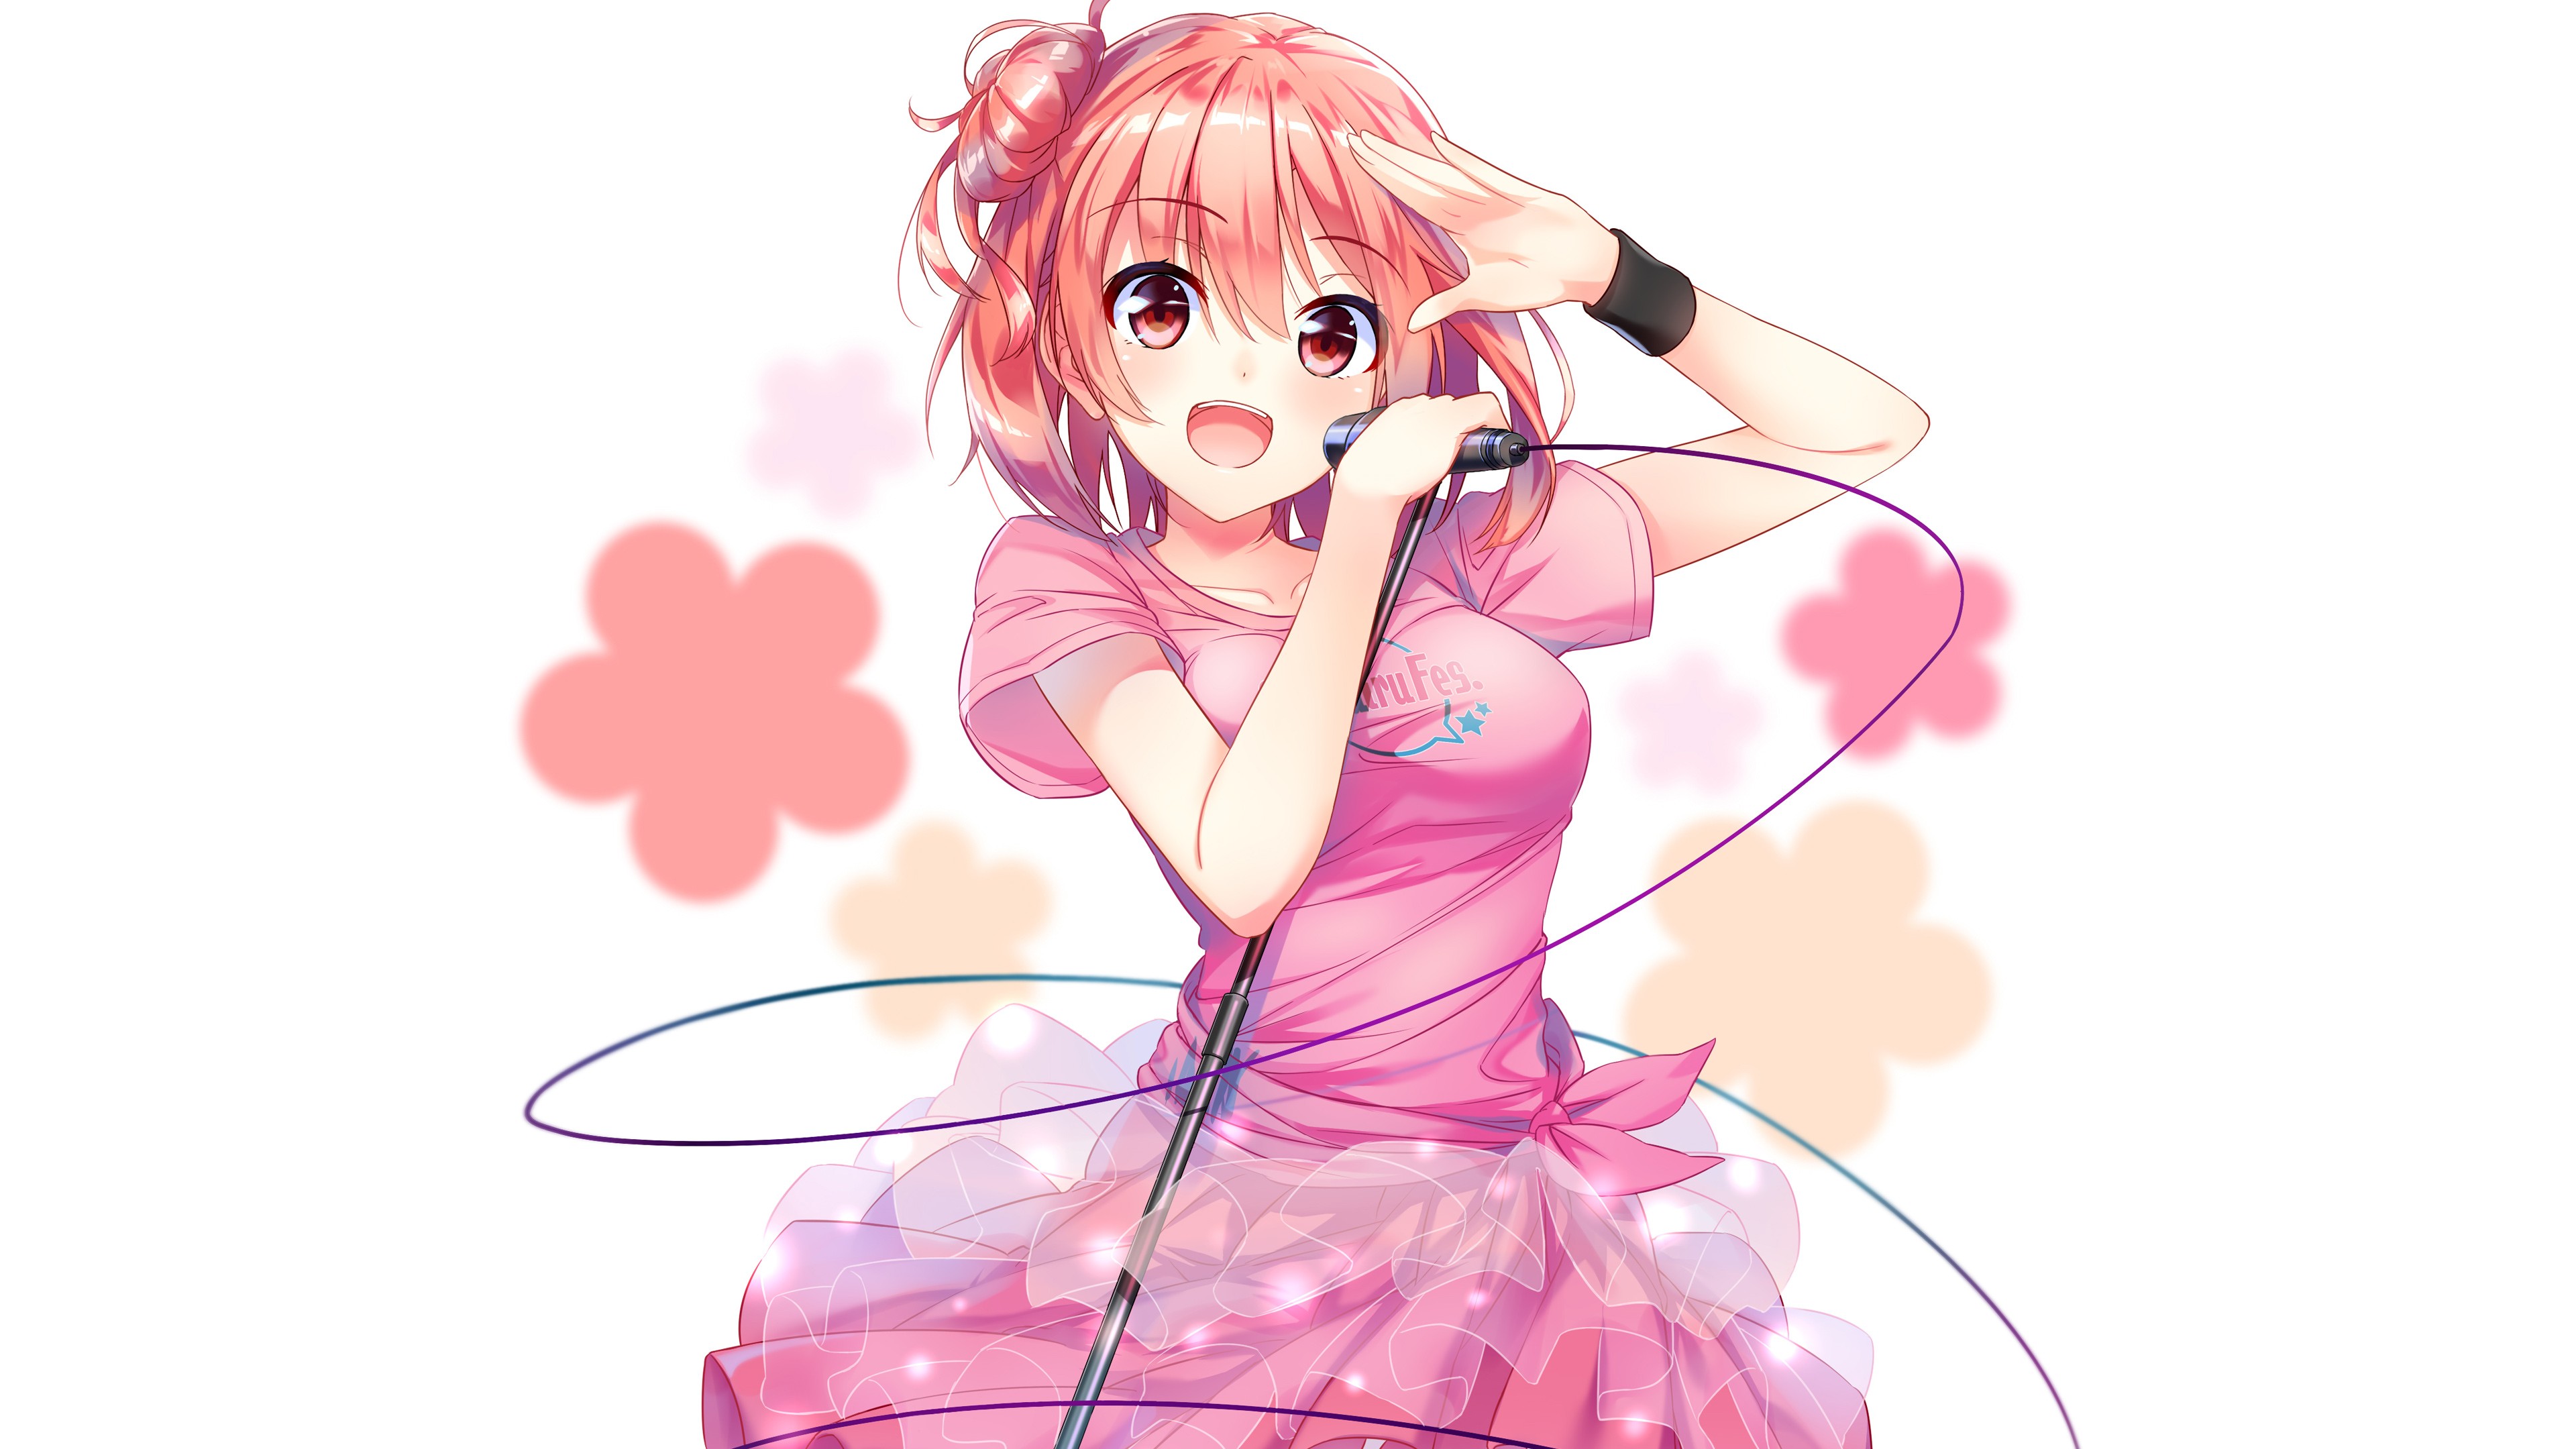 Singing girl Yui Yuigahama Anime wallpaper and image, picture, photo